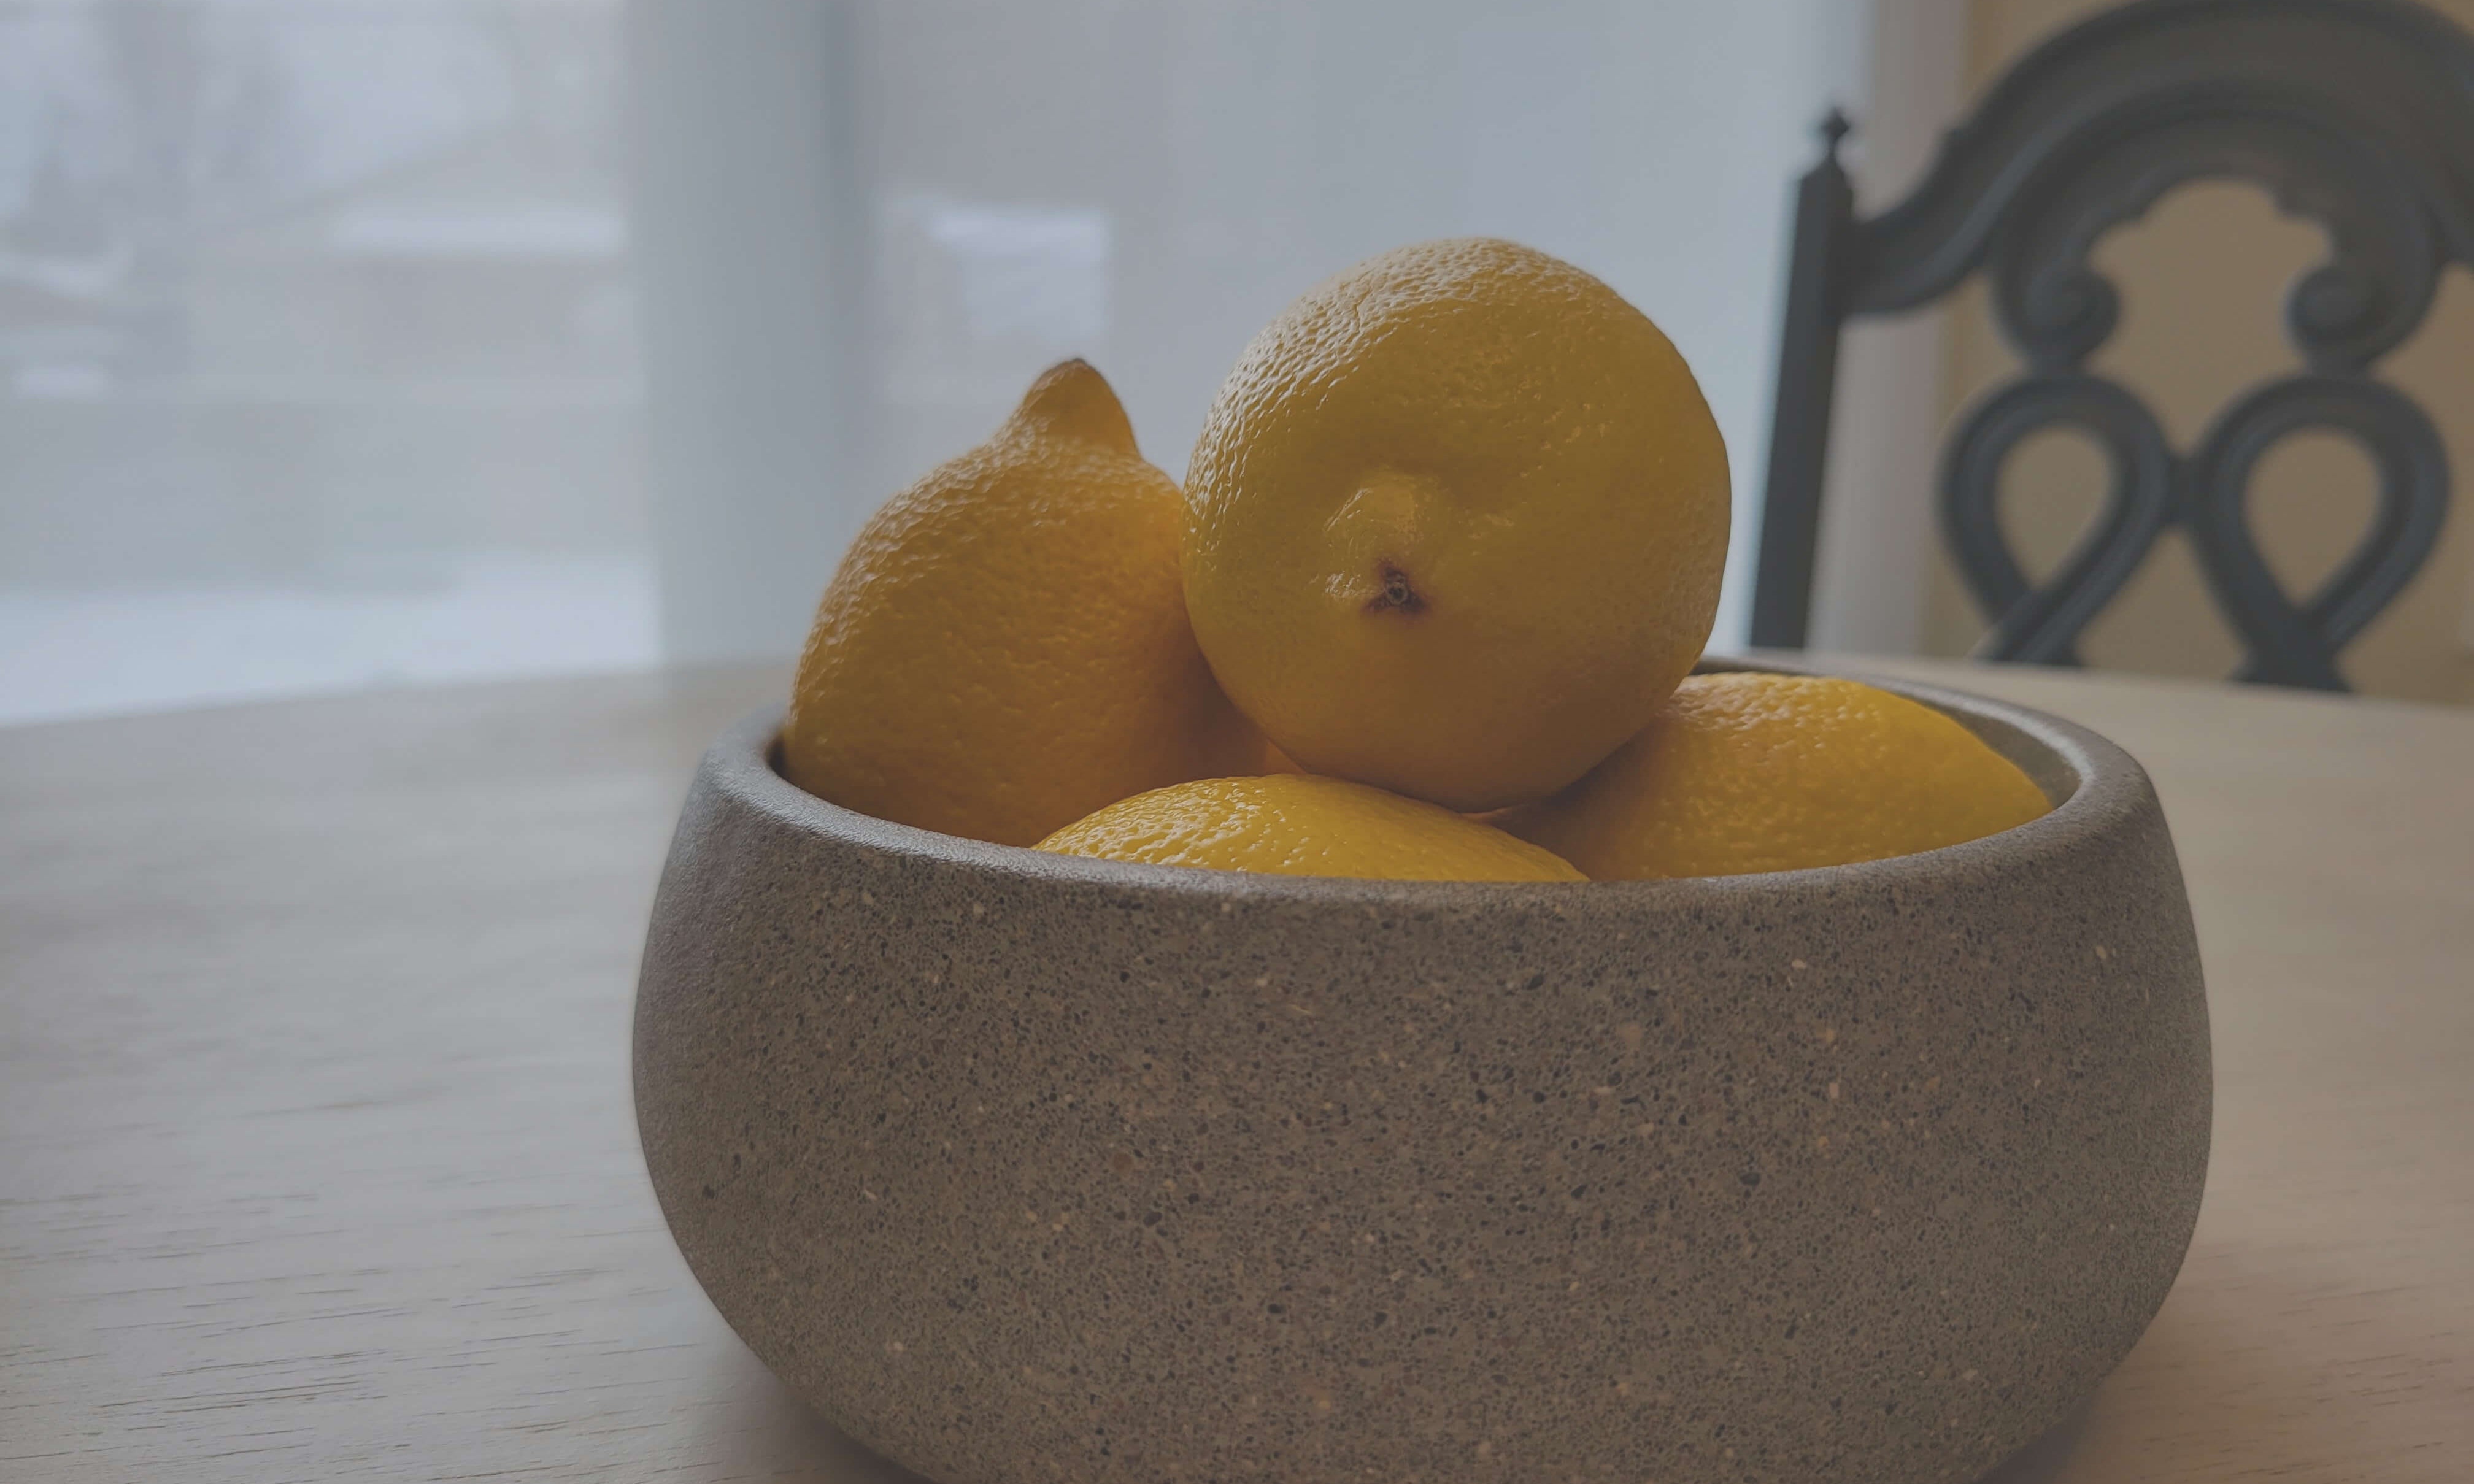 Bright Yellow Lemons in Grey Stone Bowl on Table - Vibrant Kitchen Decor Accessory